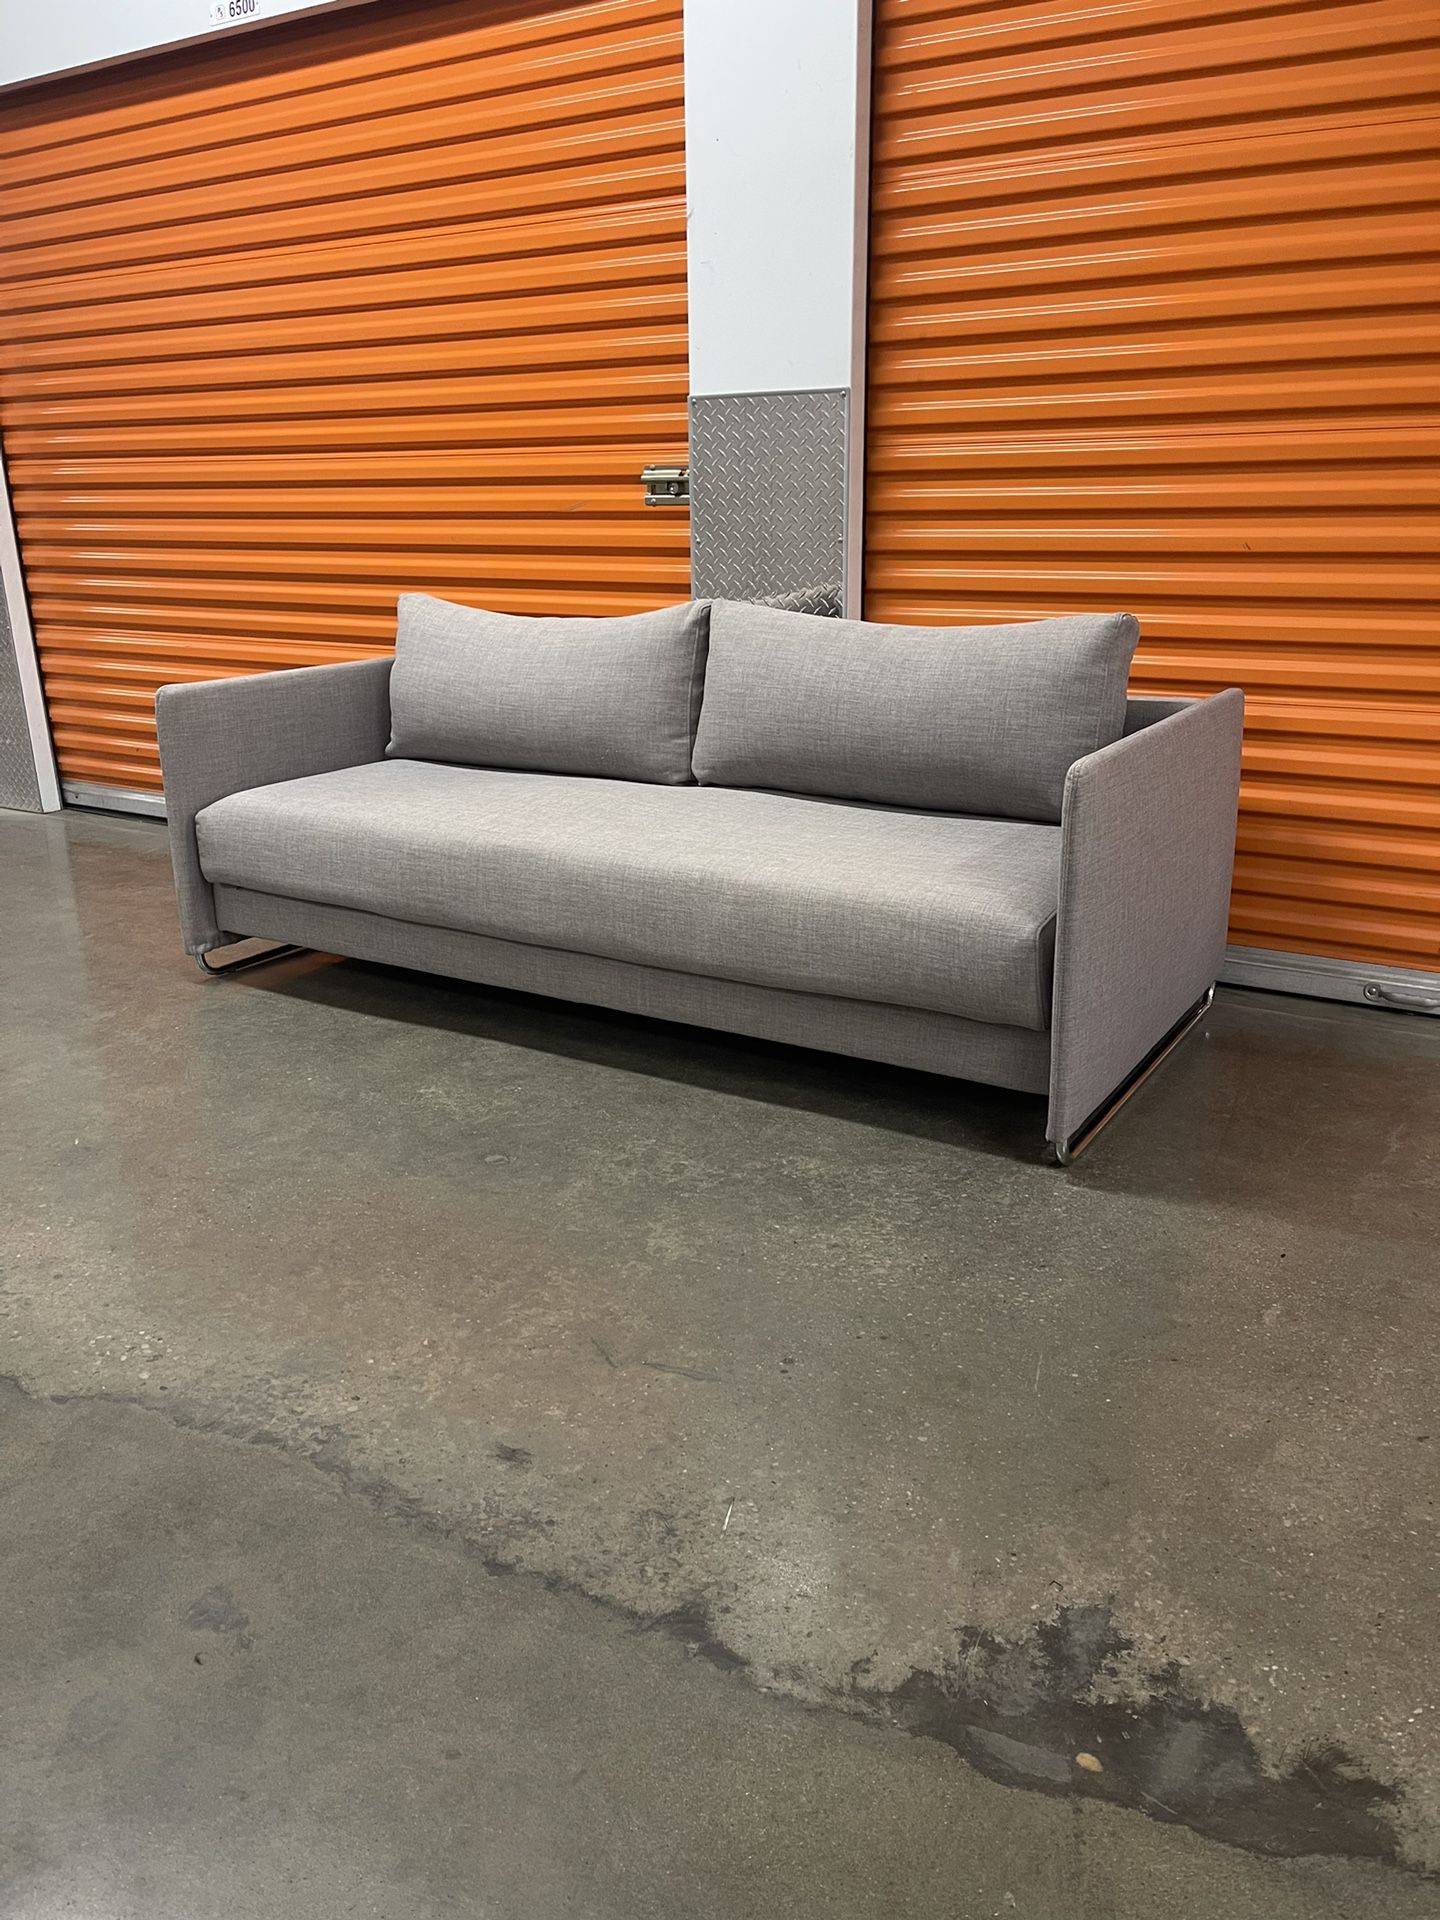 CB2 78” Tandom Sleeper Futon Sofa Couch | FREE DELIVERY | NYC 🚛